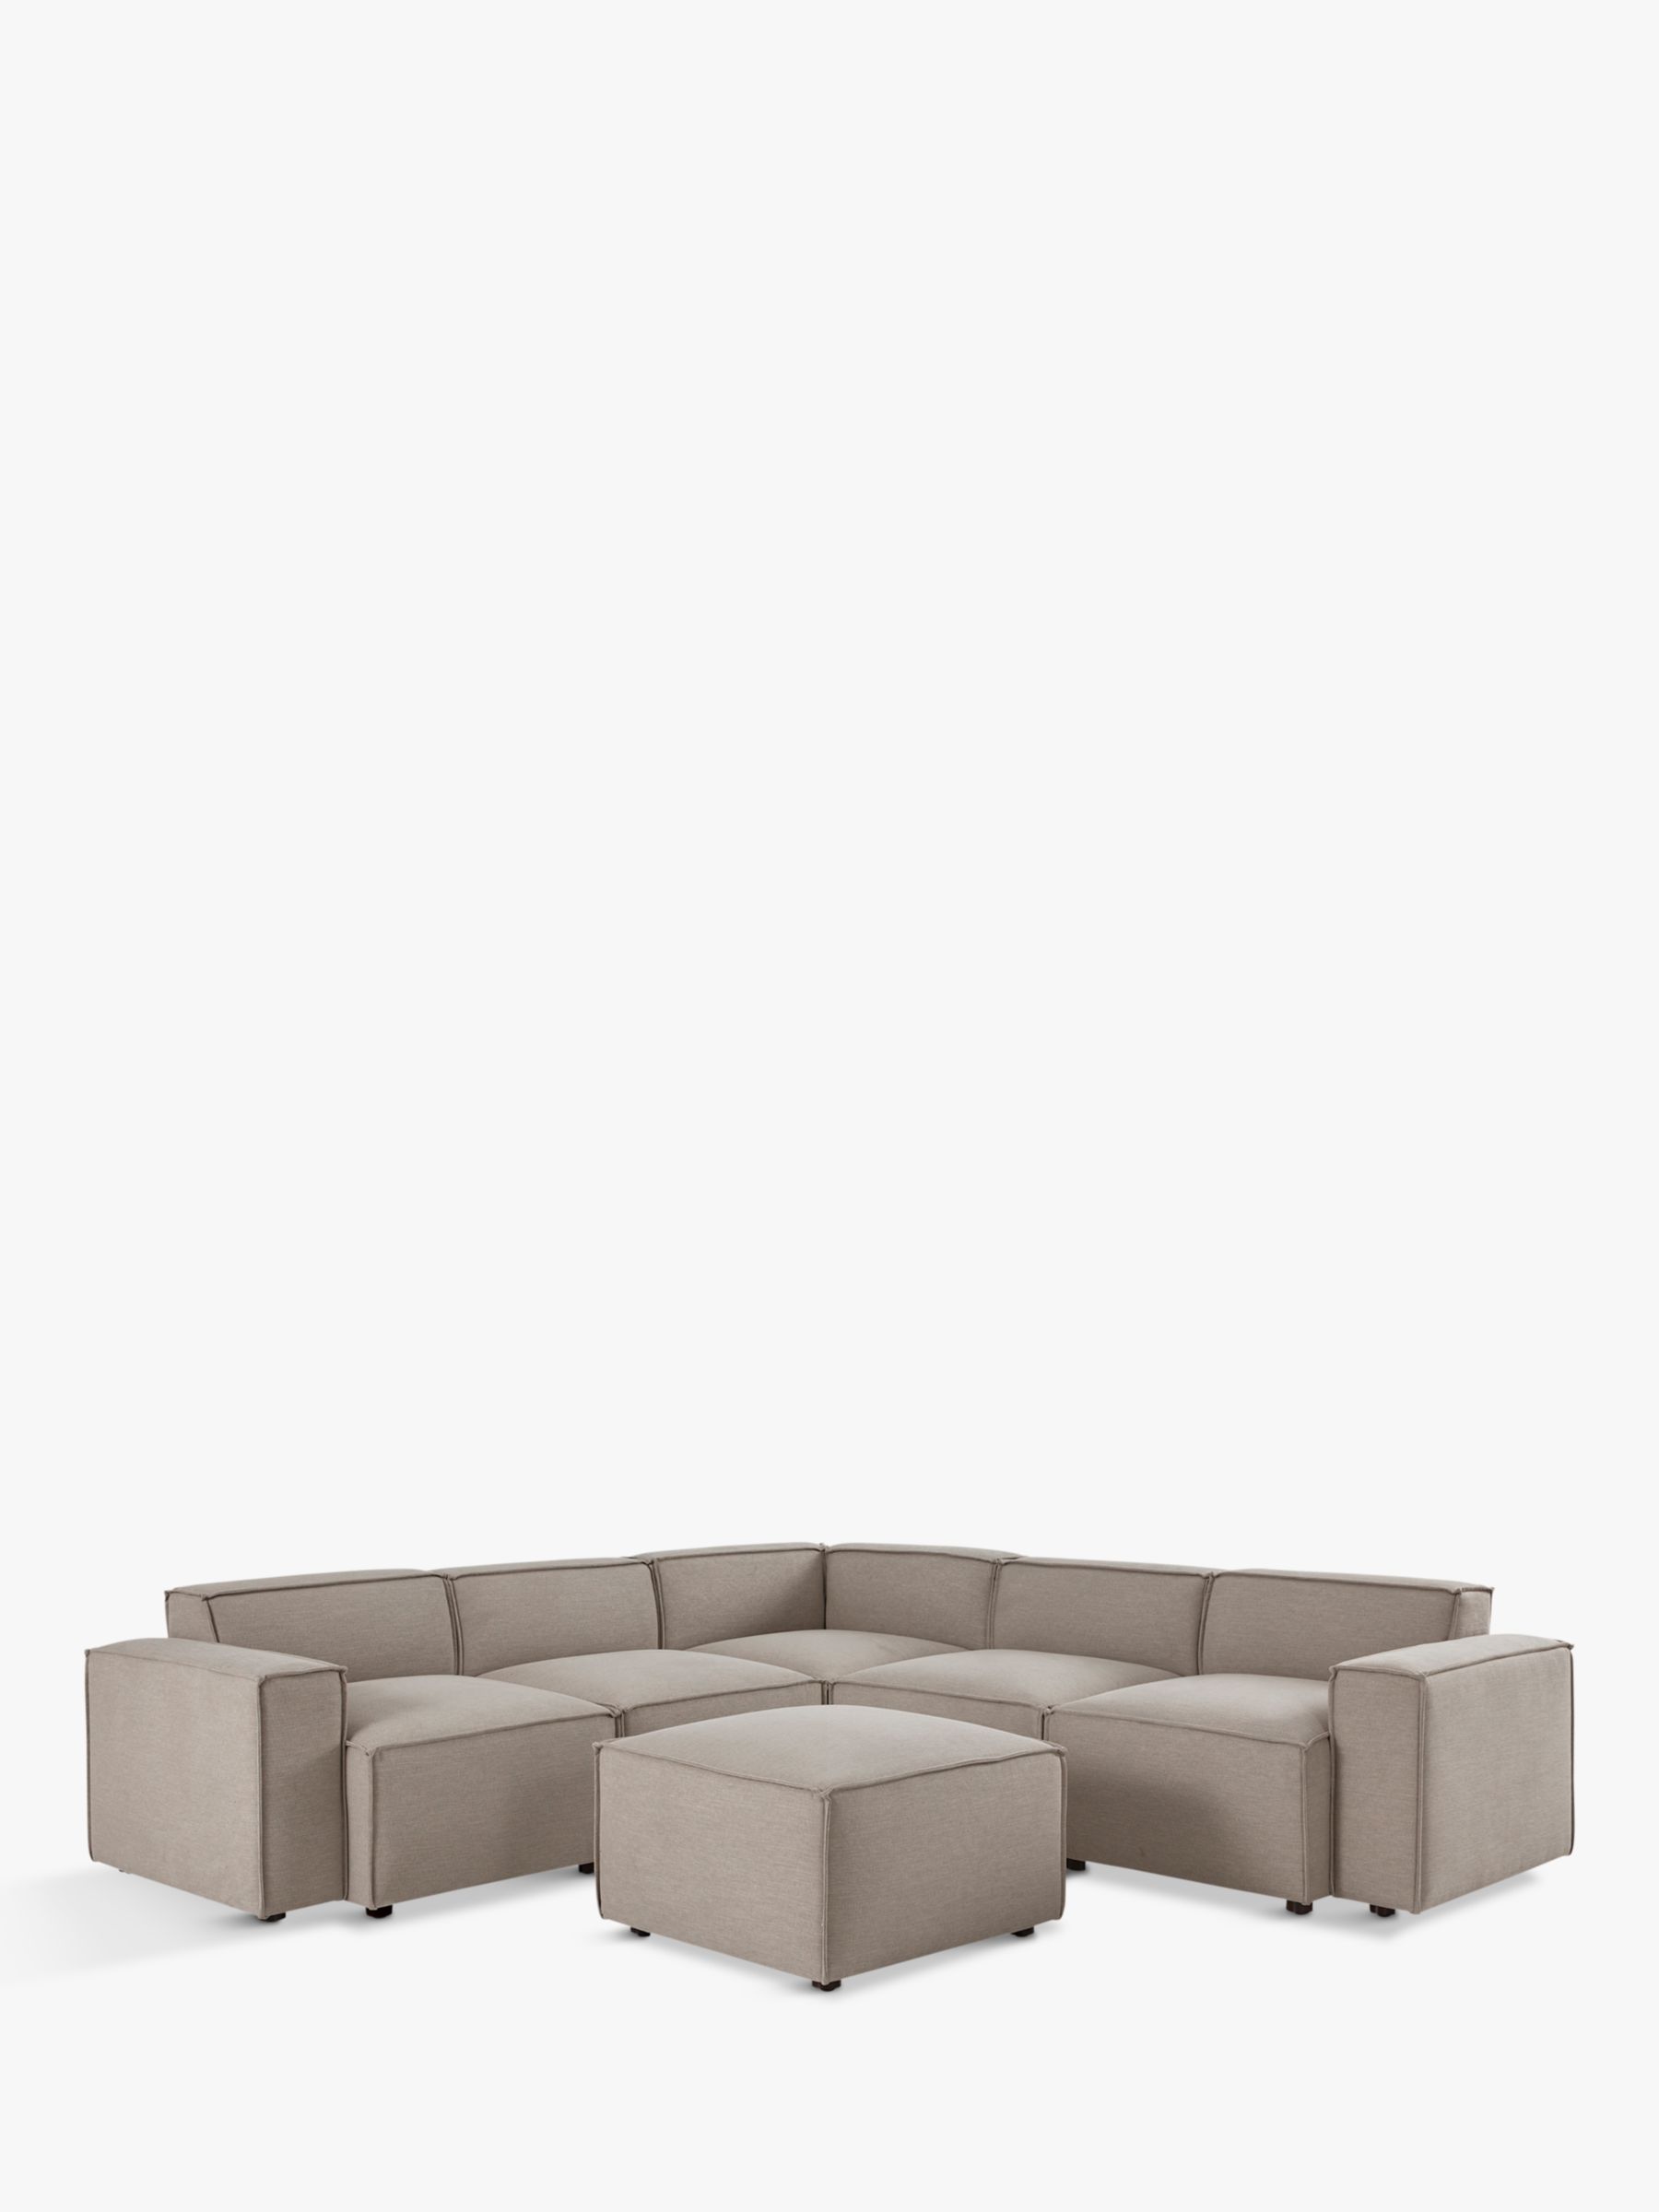 Photo of Swyft model 03 5 seater corner sofa with ottoman